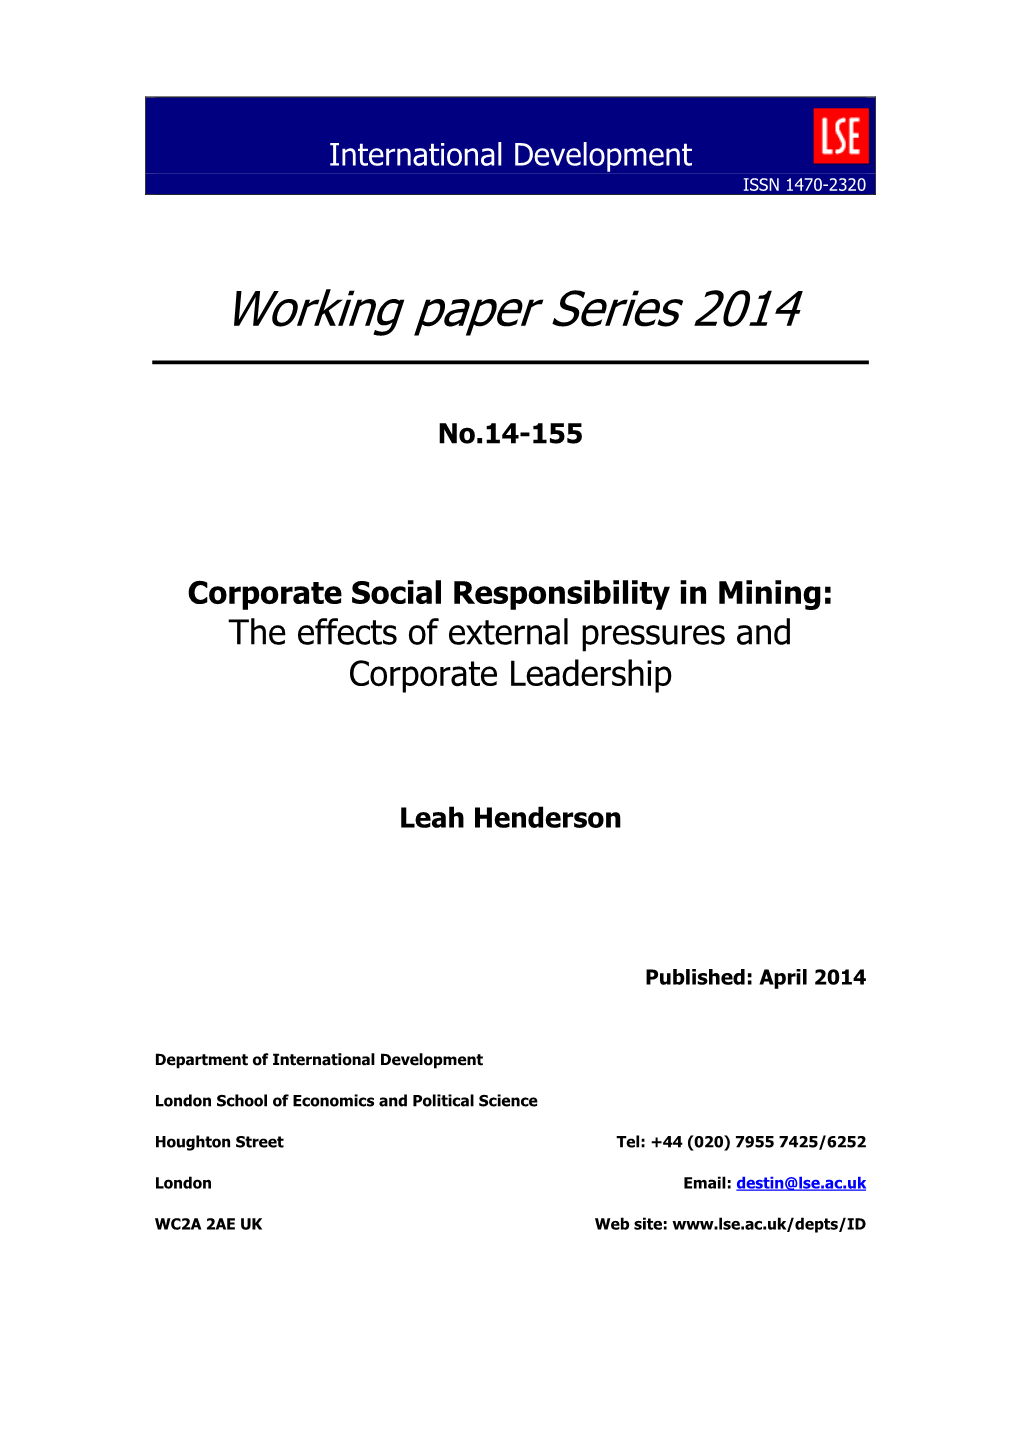 Corporate Social Responsibility in Mining: the Effects of External Pressures and Corporate Leadership